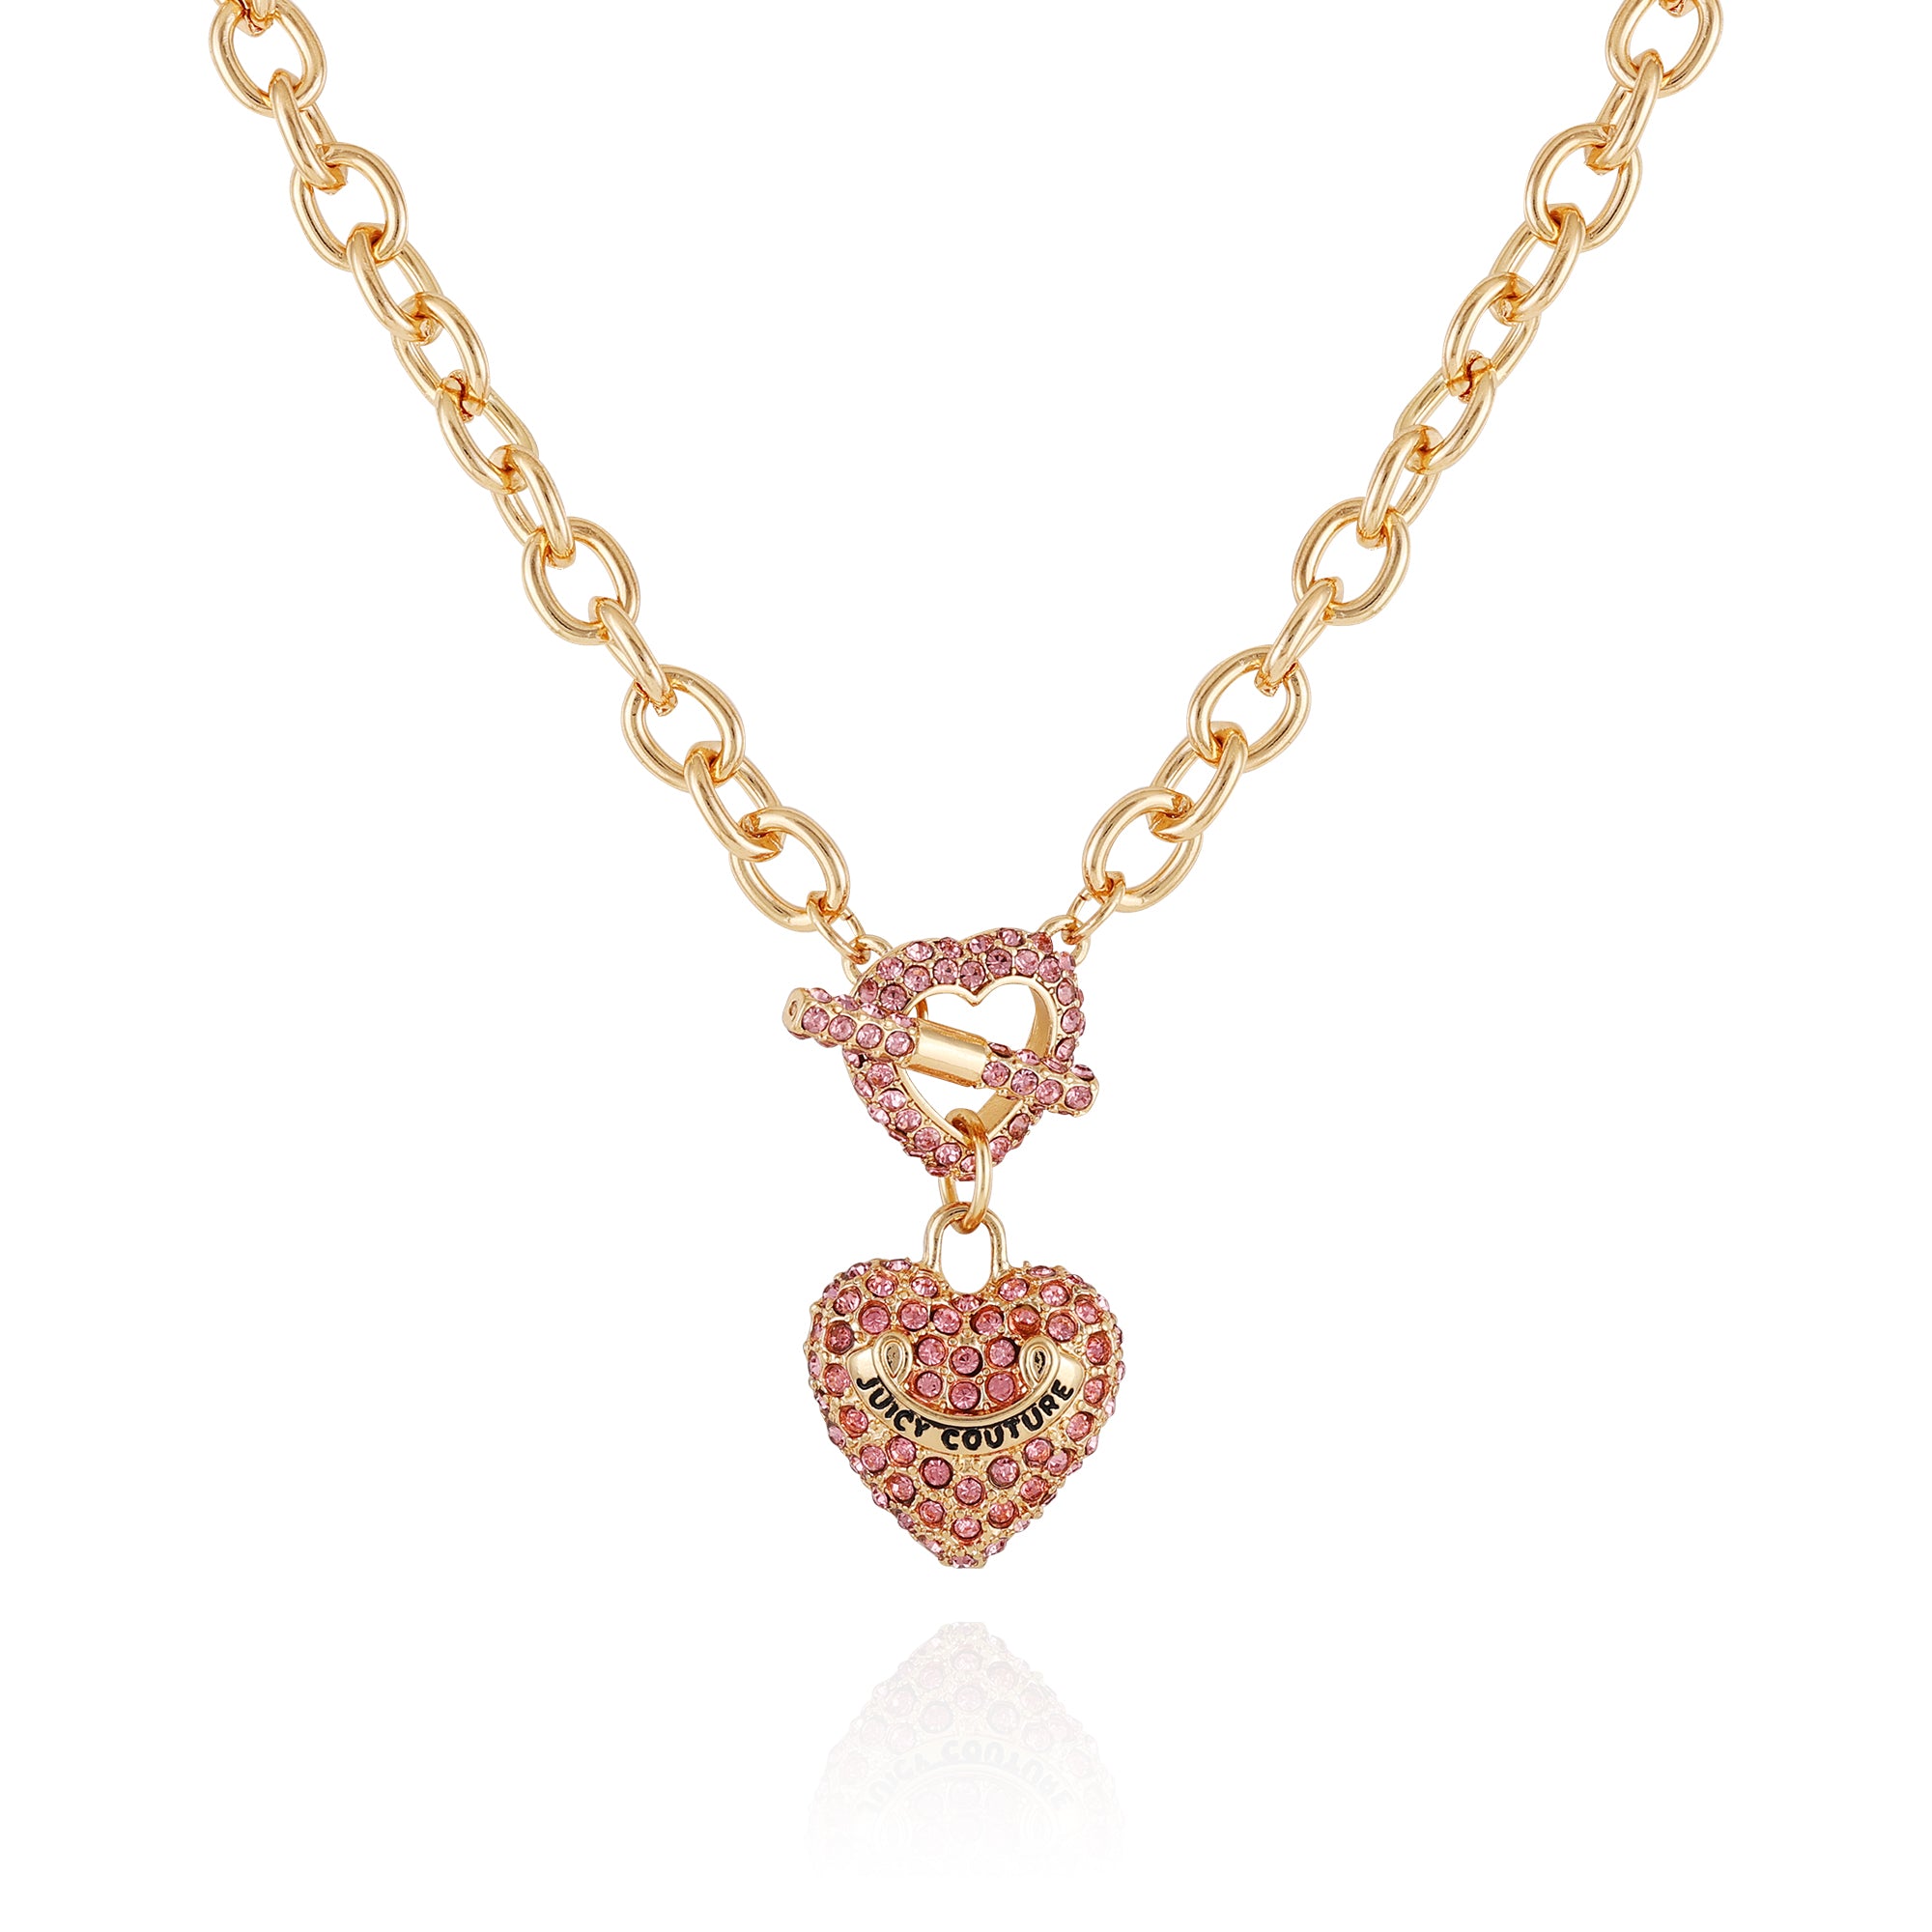 Juicy Couture Gold Tone Double Ball Chain Bracelet Heart & J Charm NWT